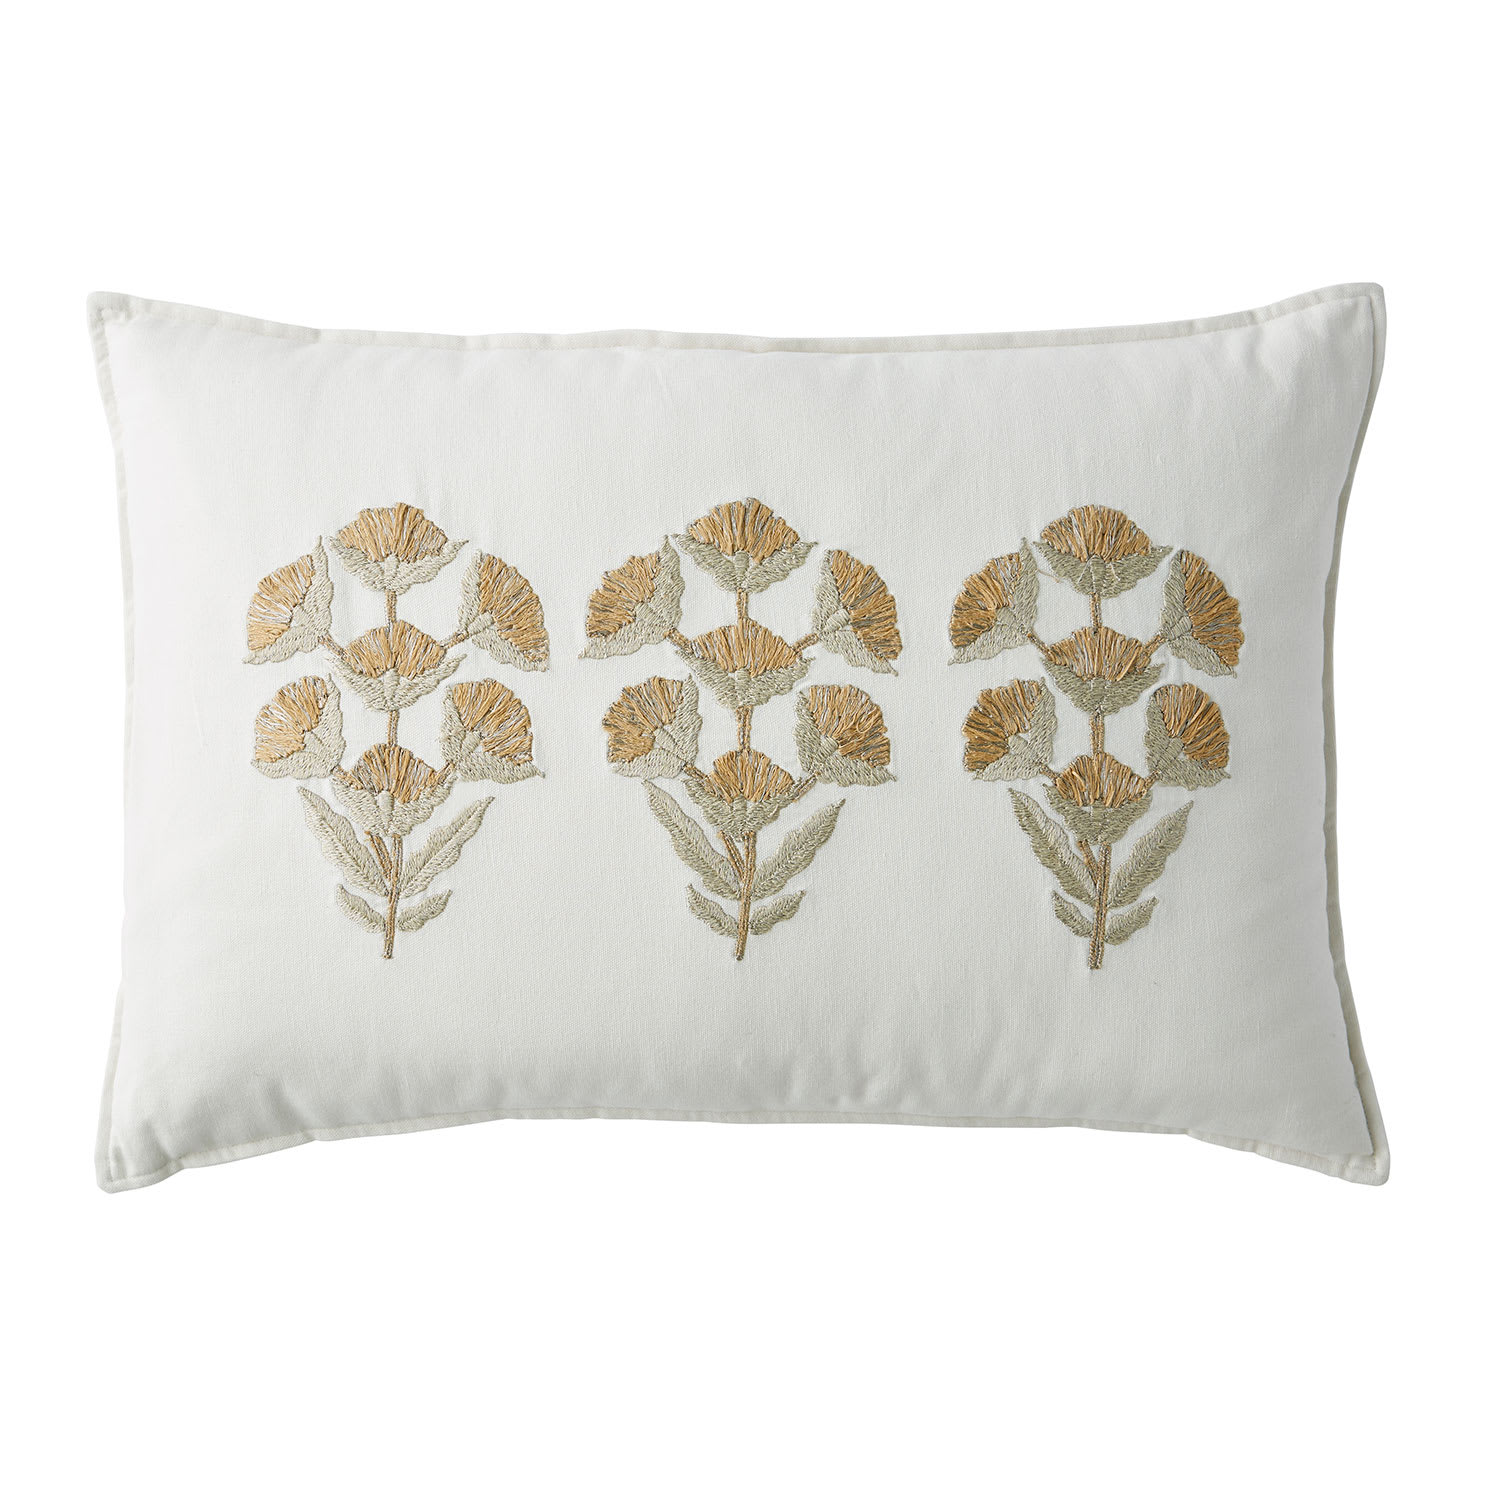 Gold Embroidered Floral Pillow Cover - Embroidered Floral